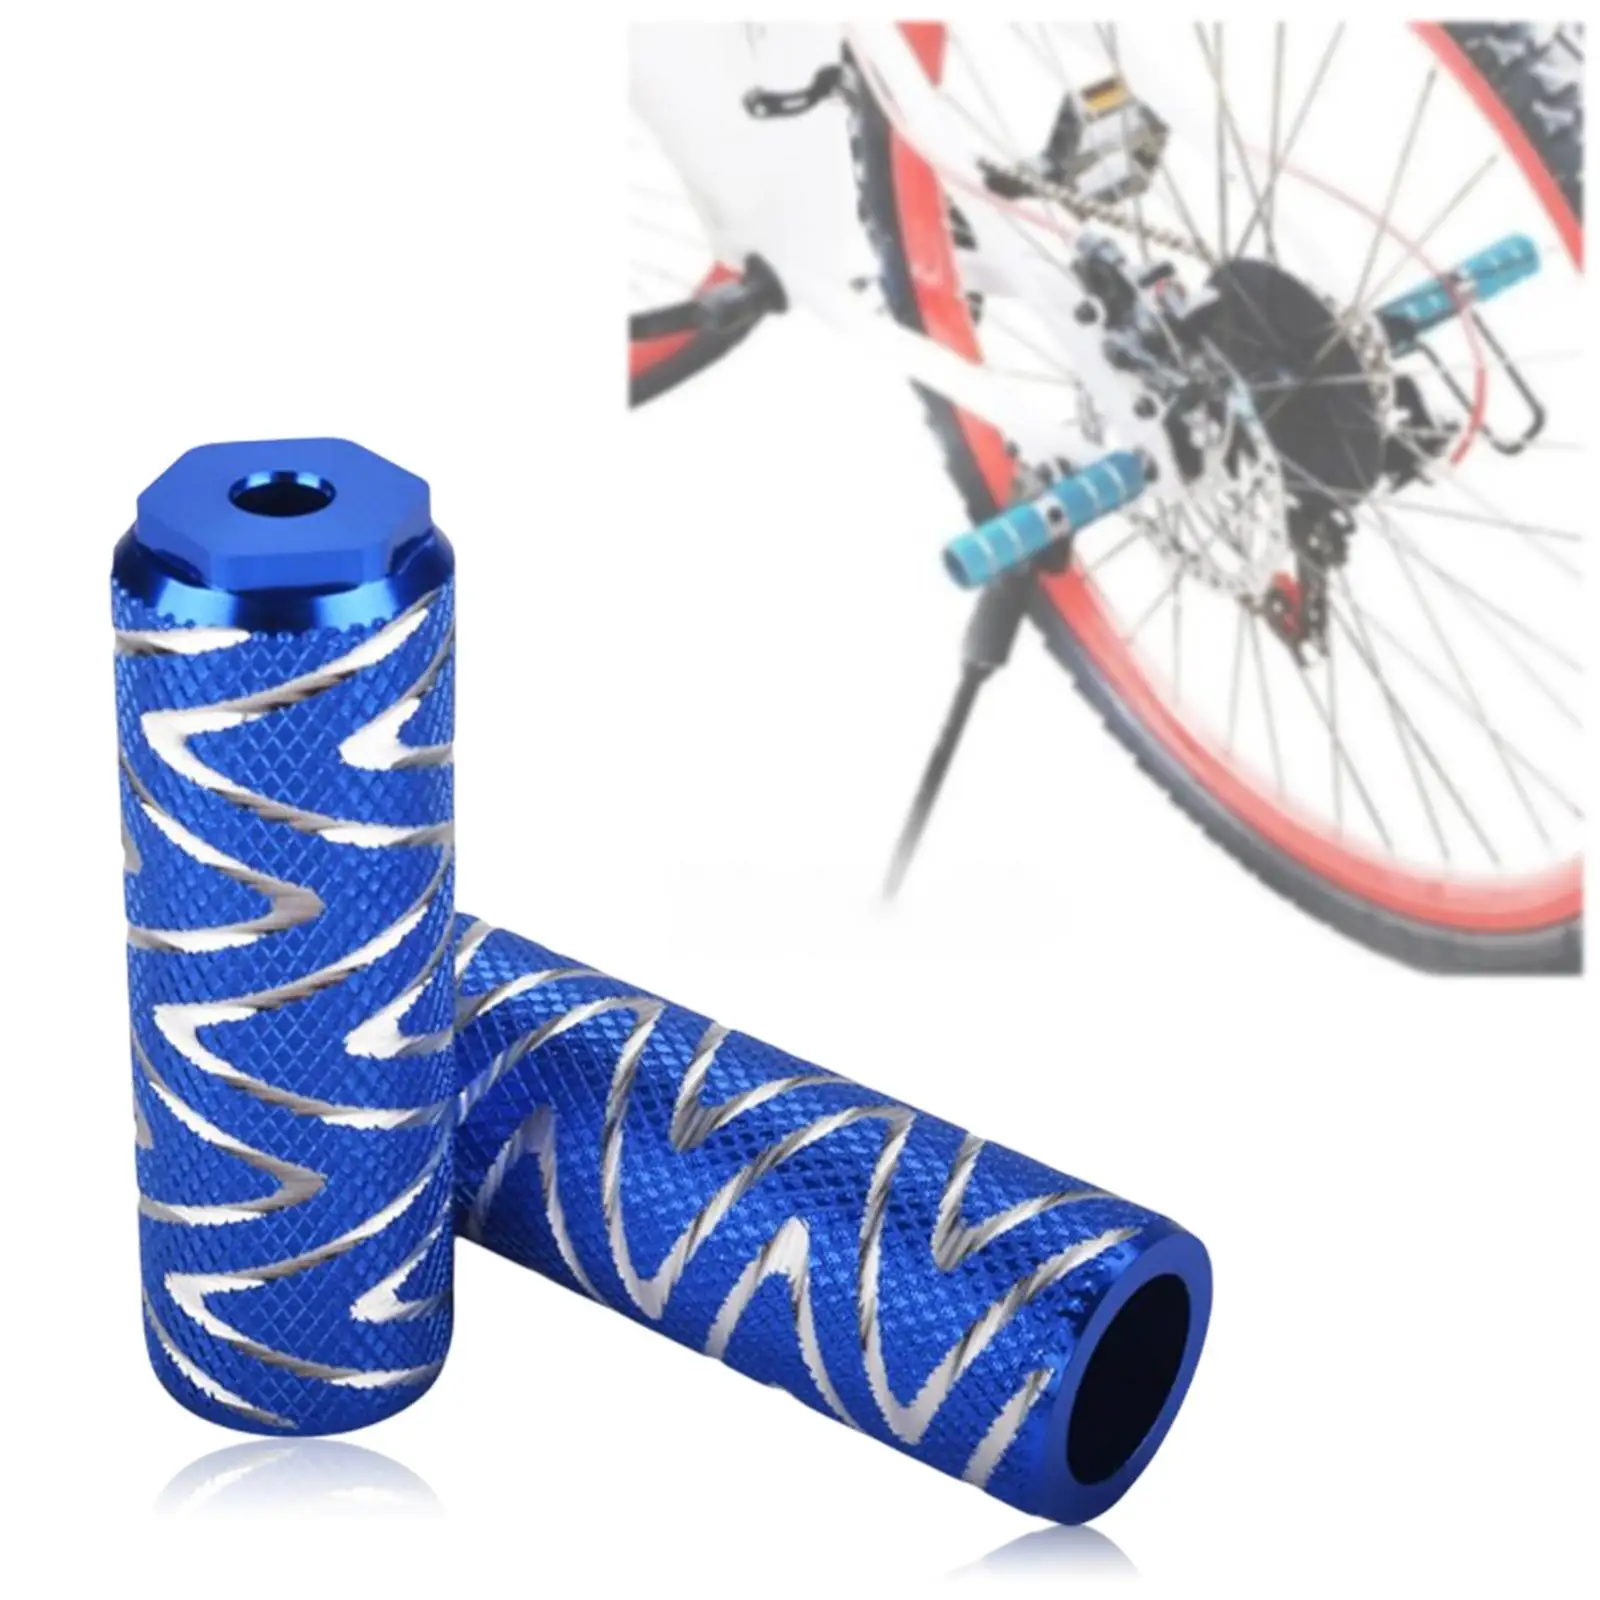 Bike Pegs Anti-Skid   Axle Pegs Footrests Bicycle Foot Pegs for Bicycle Rear